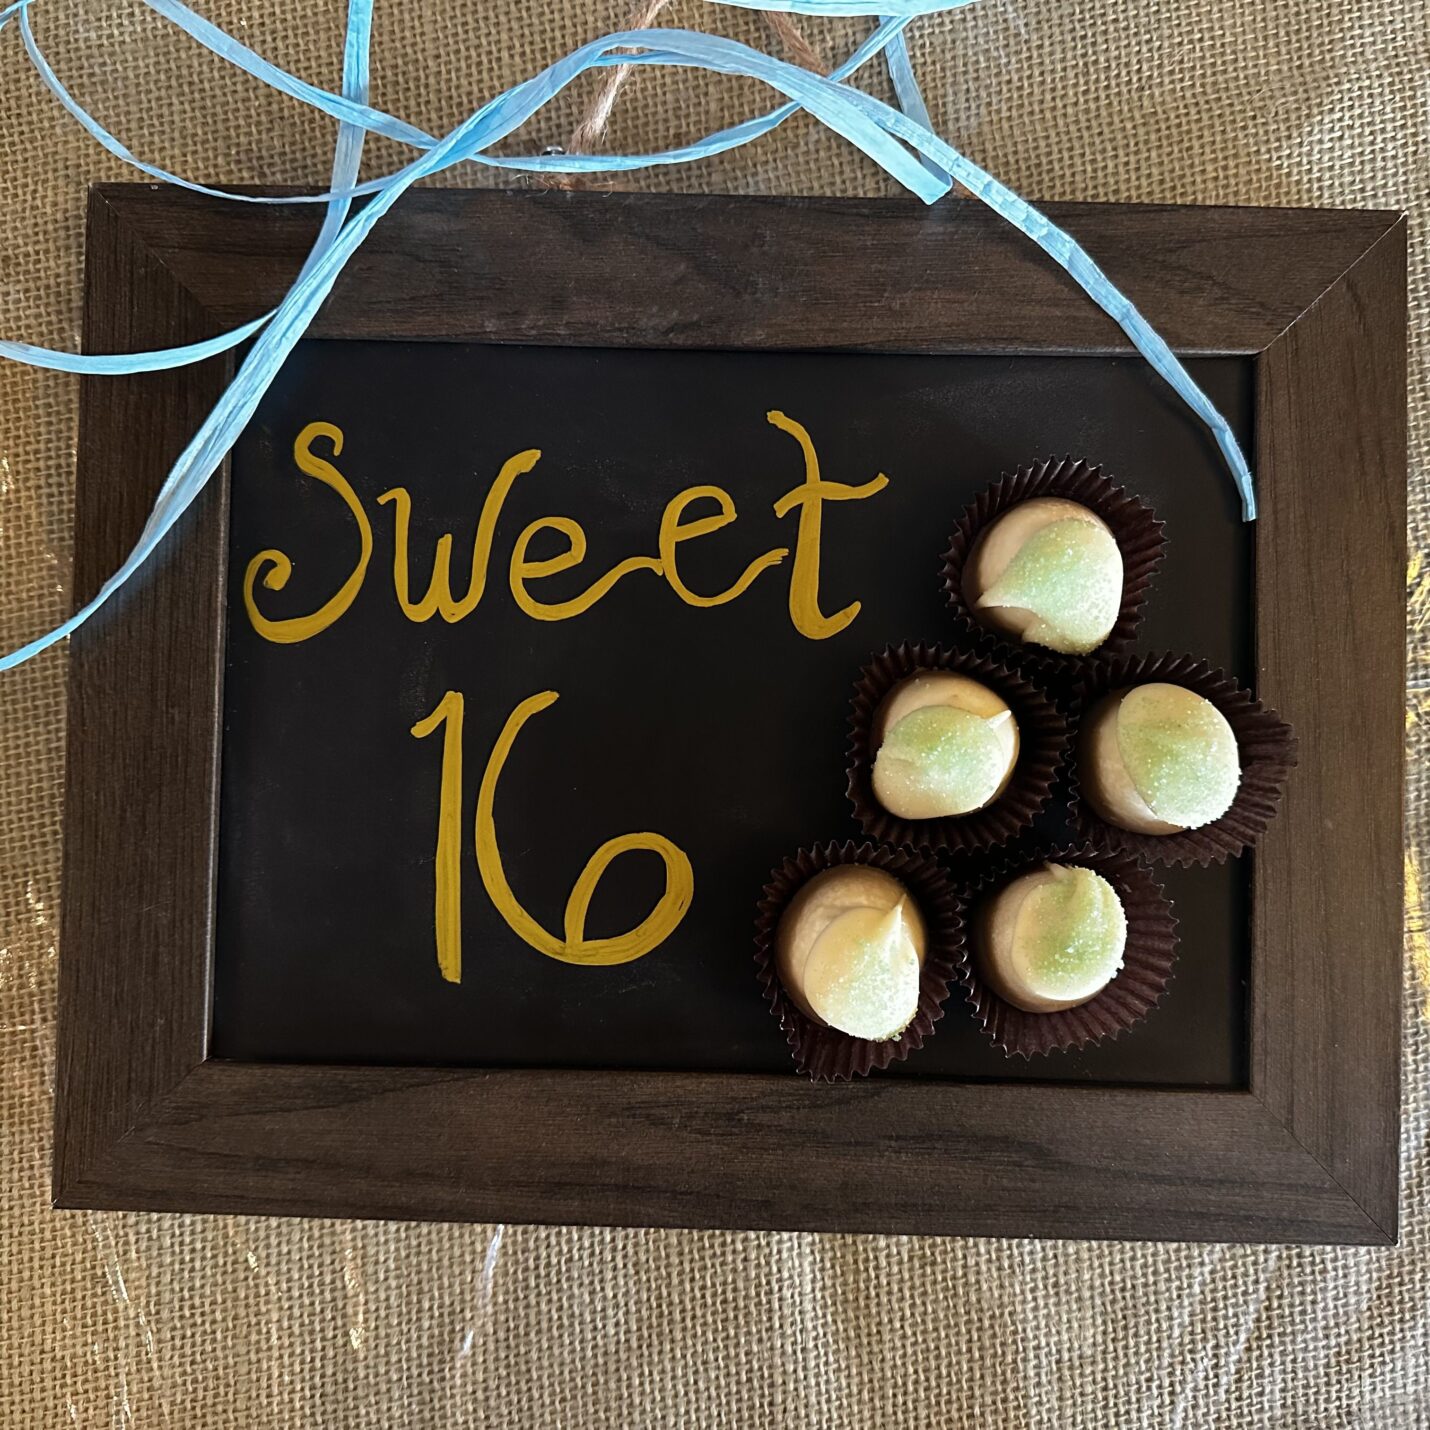 chalkboard that says sweet 16 with white chocolate truffles next to the words